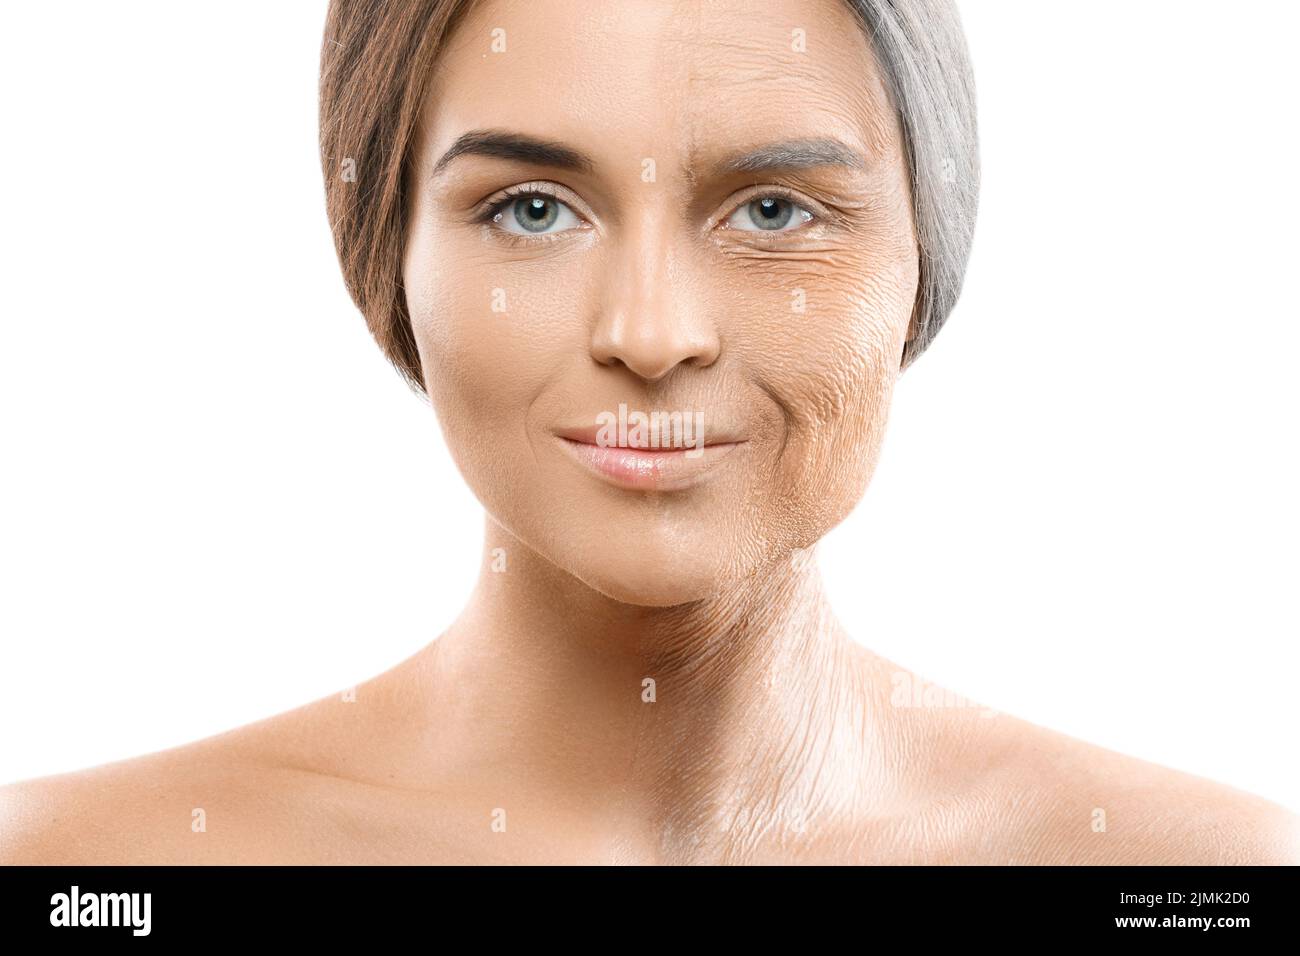 Aging concept. Young and old face comparision. Stock Photo